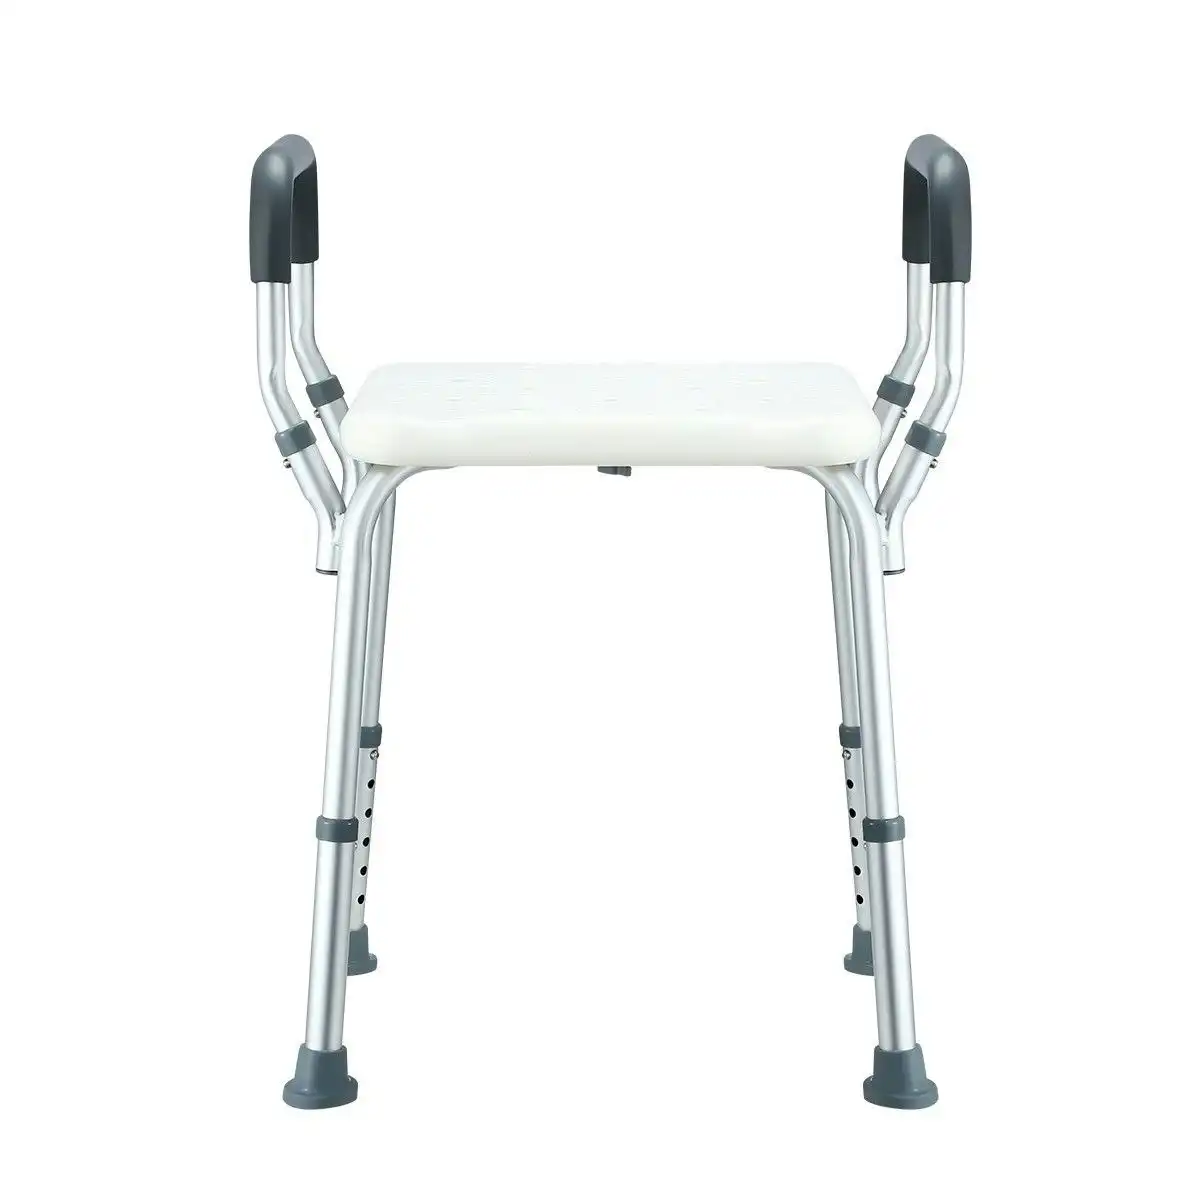 Ausway Adjustable Shower Chair Seat Bath Stool with Padded Armrests